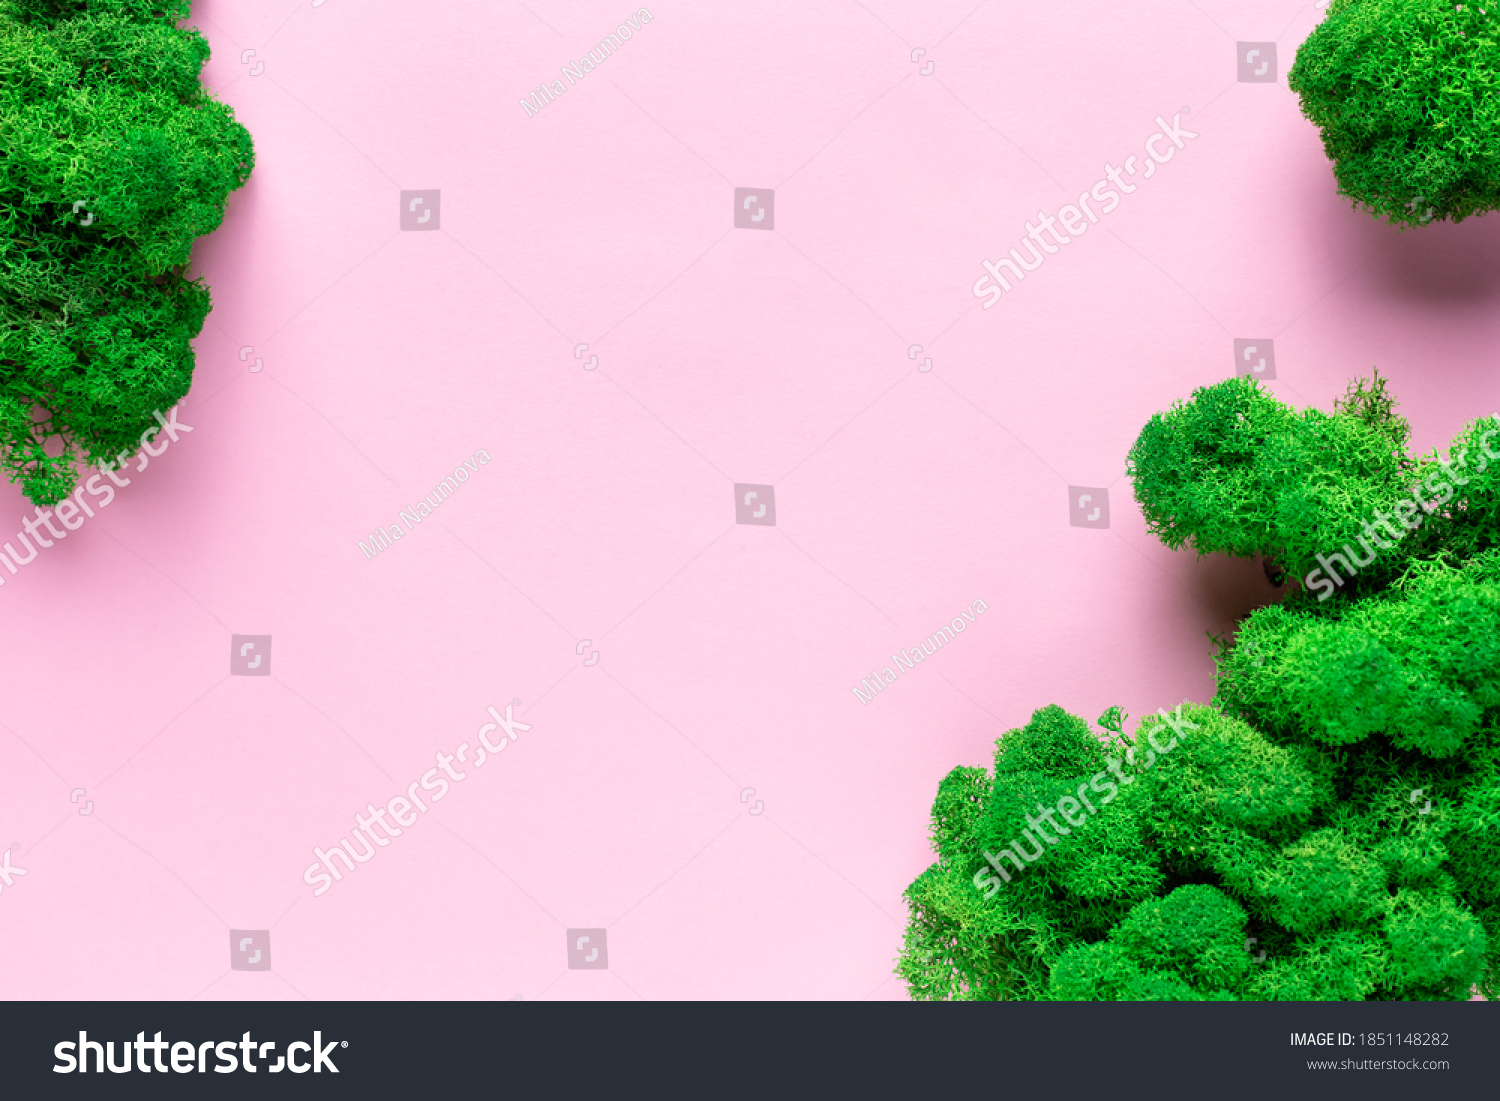 frame from green stabilized moss on pink background for organic cosmetic products. Environmentally clear nature concept. flat lay. place for your text or design. #1851148282